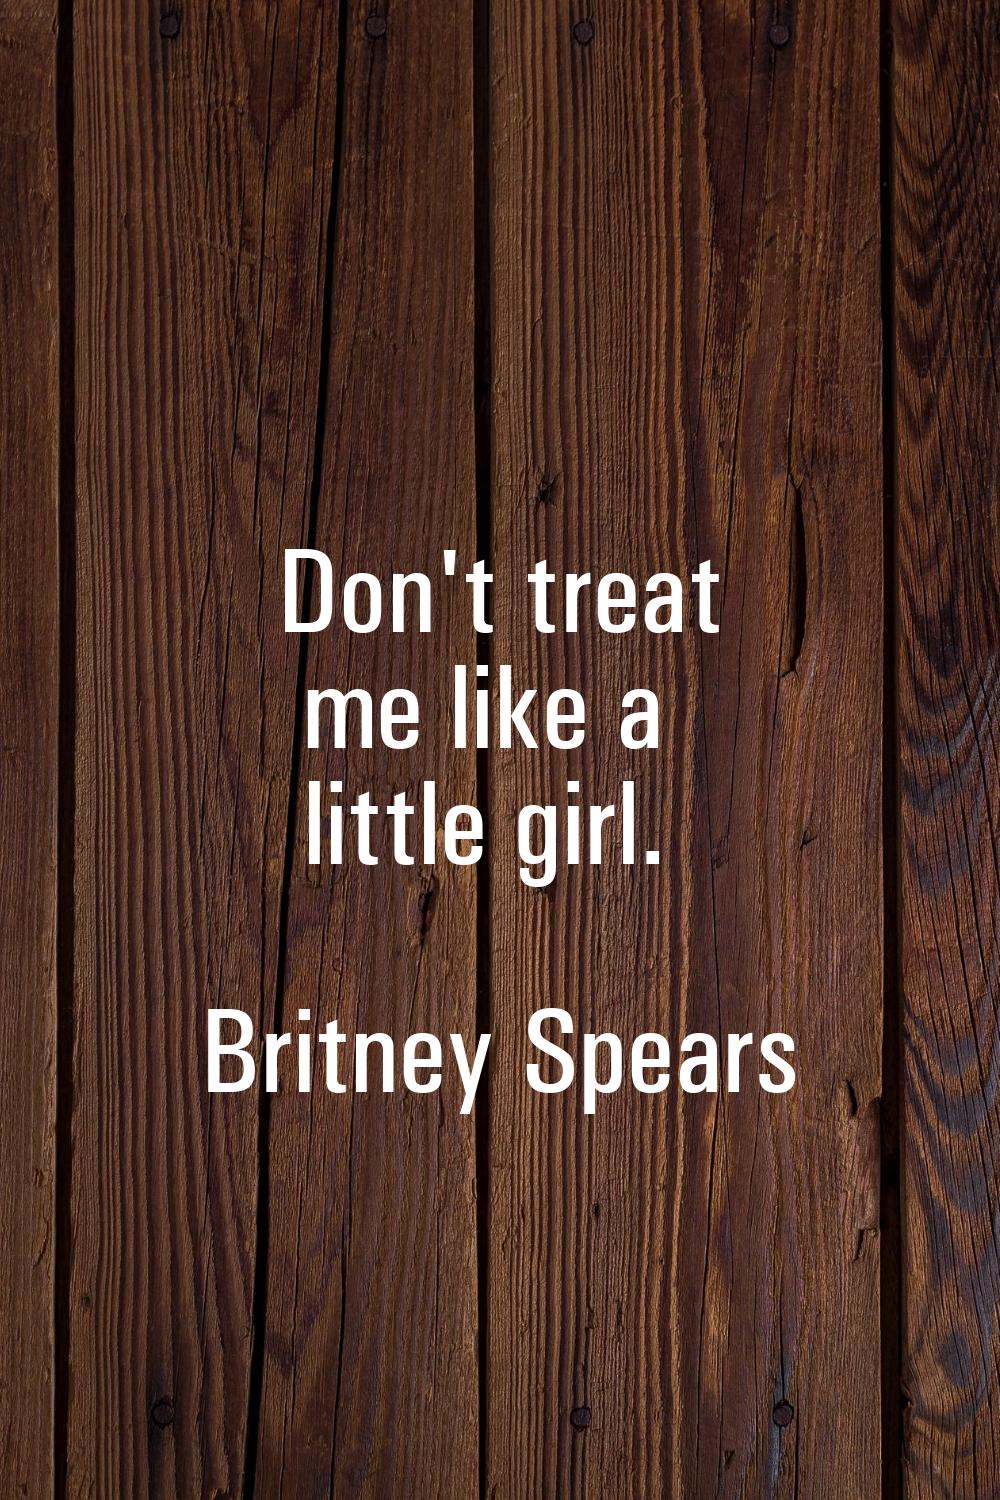 Don't treat me like a little girl.